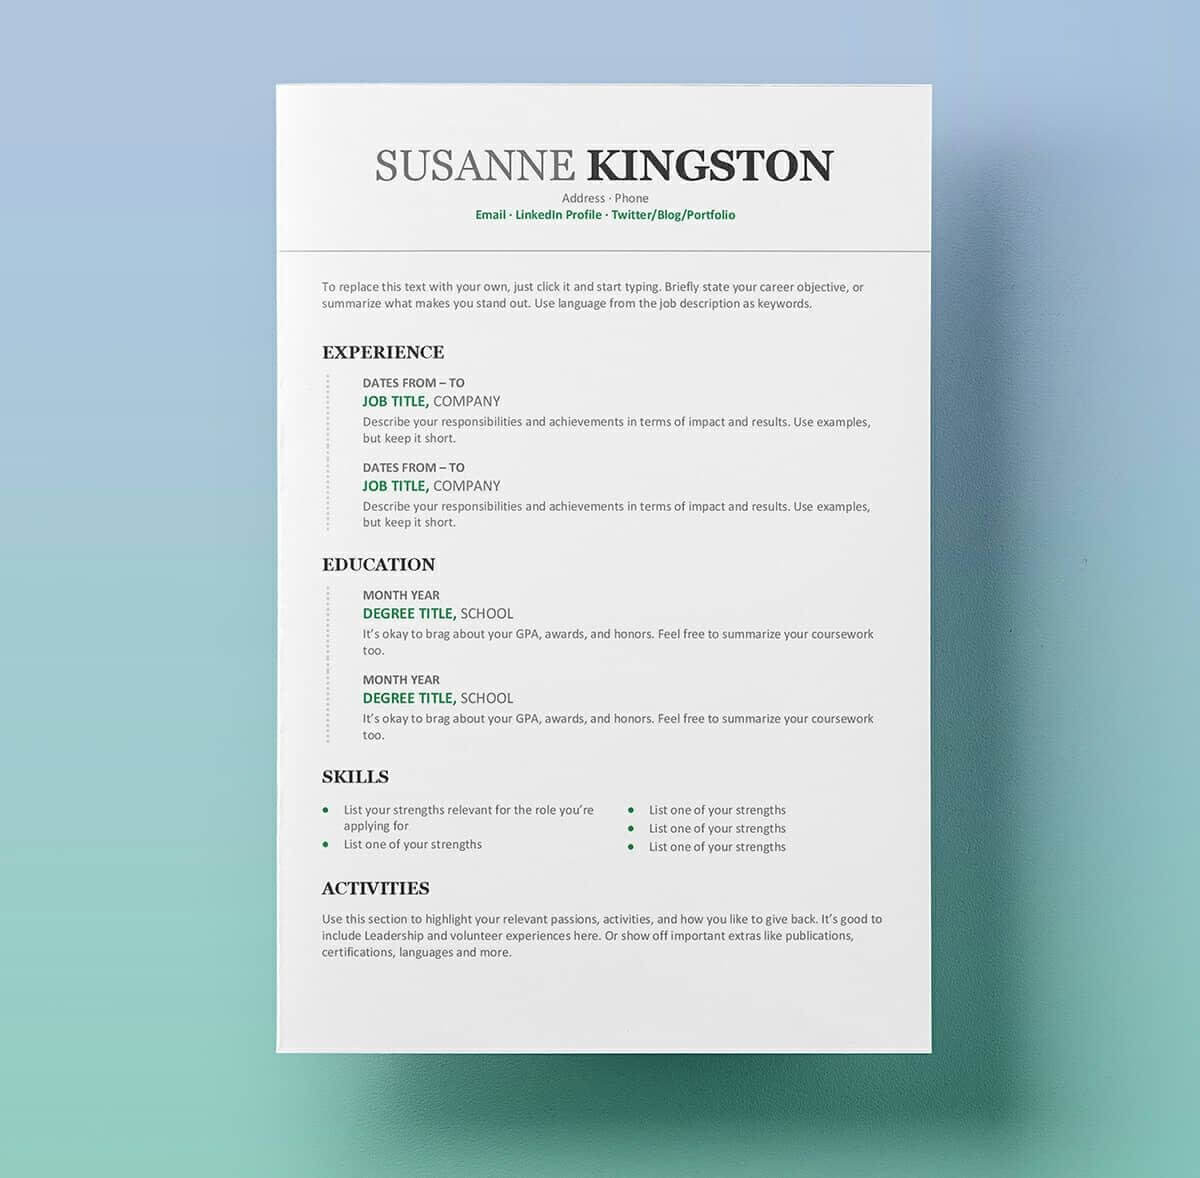 Free Professional Cv Format In Ms Word – Free Downloadable Throughout Free Downloadable Resume Templates For Word